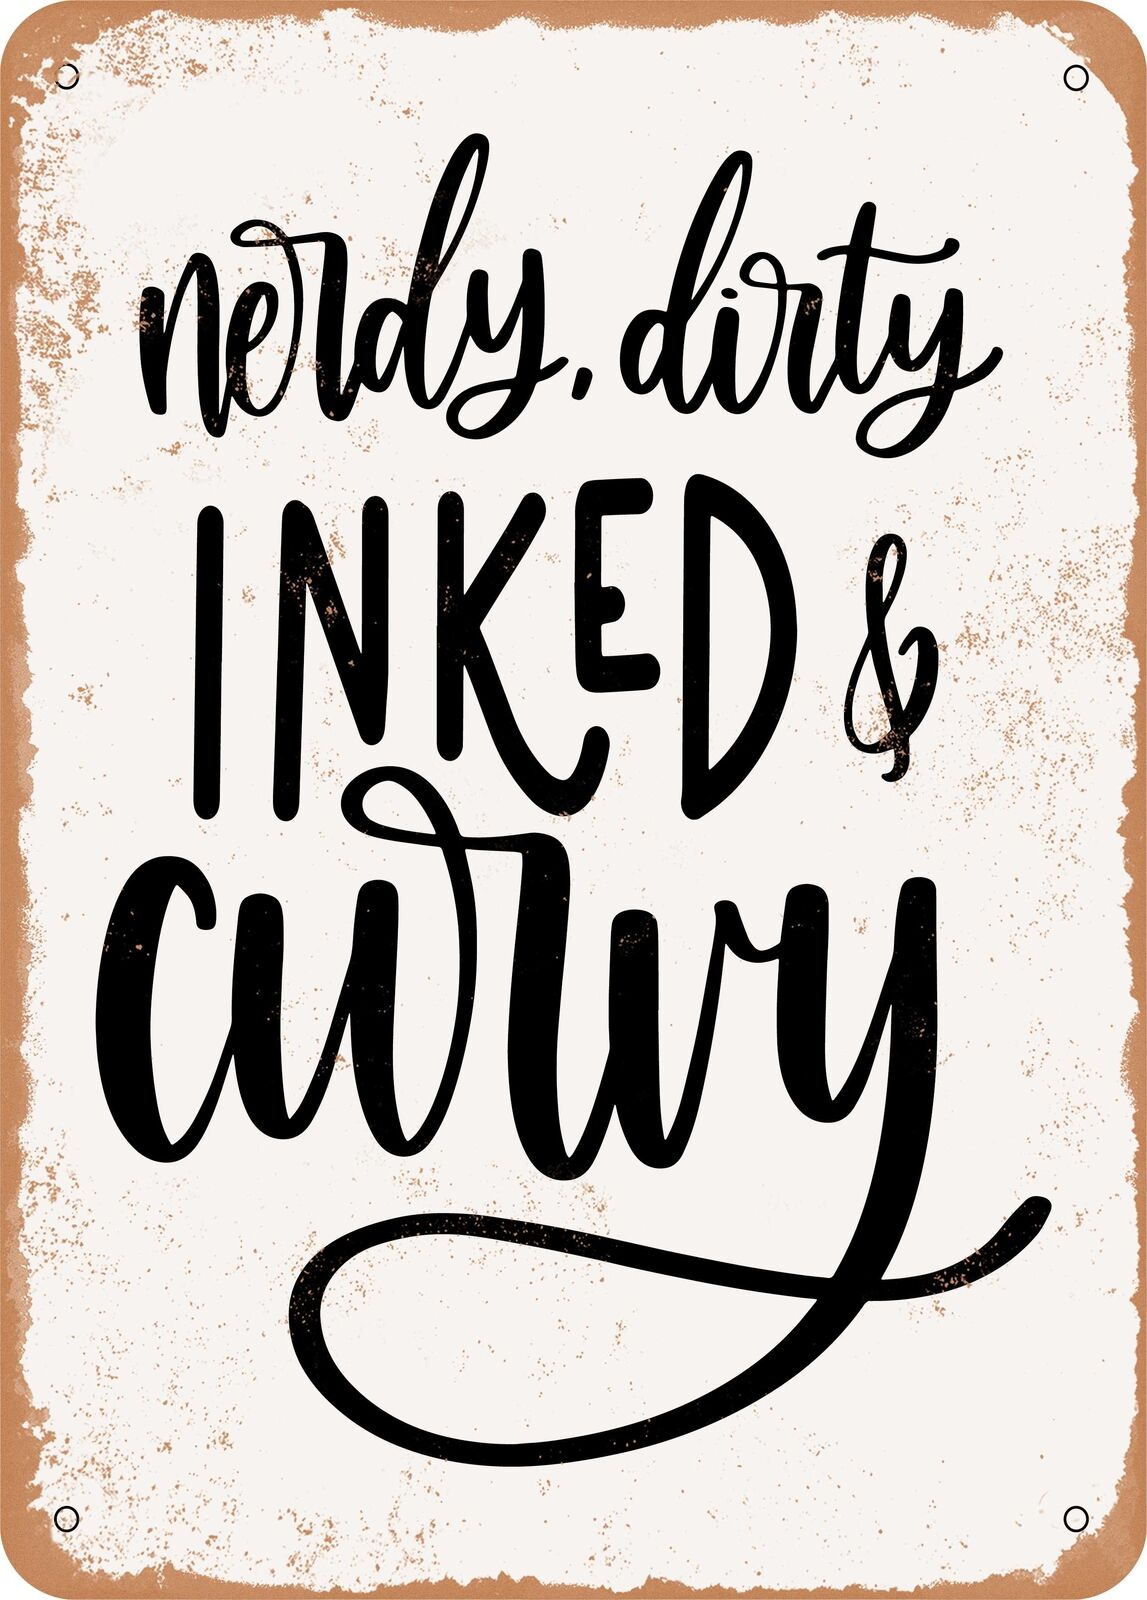 Metal Sign - Nerdy Dirty Inked and Curvy - Vintage Rusty Look